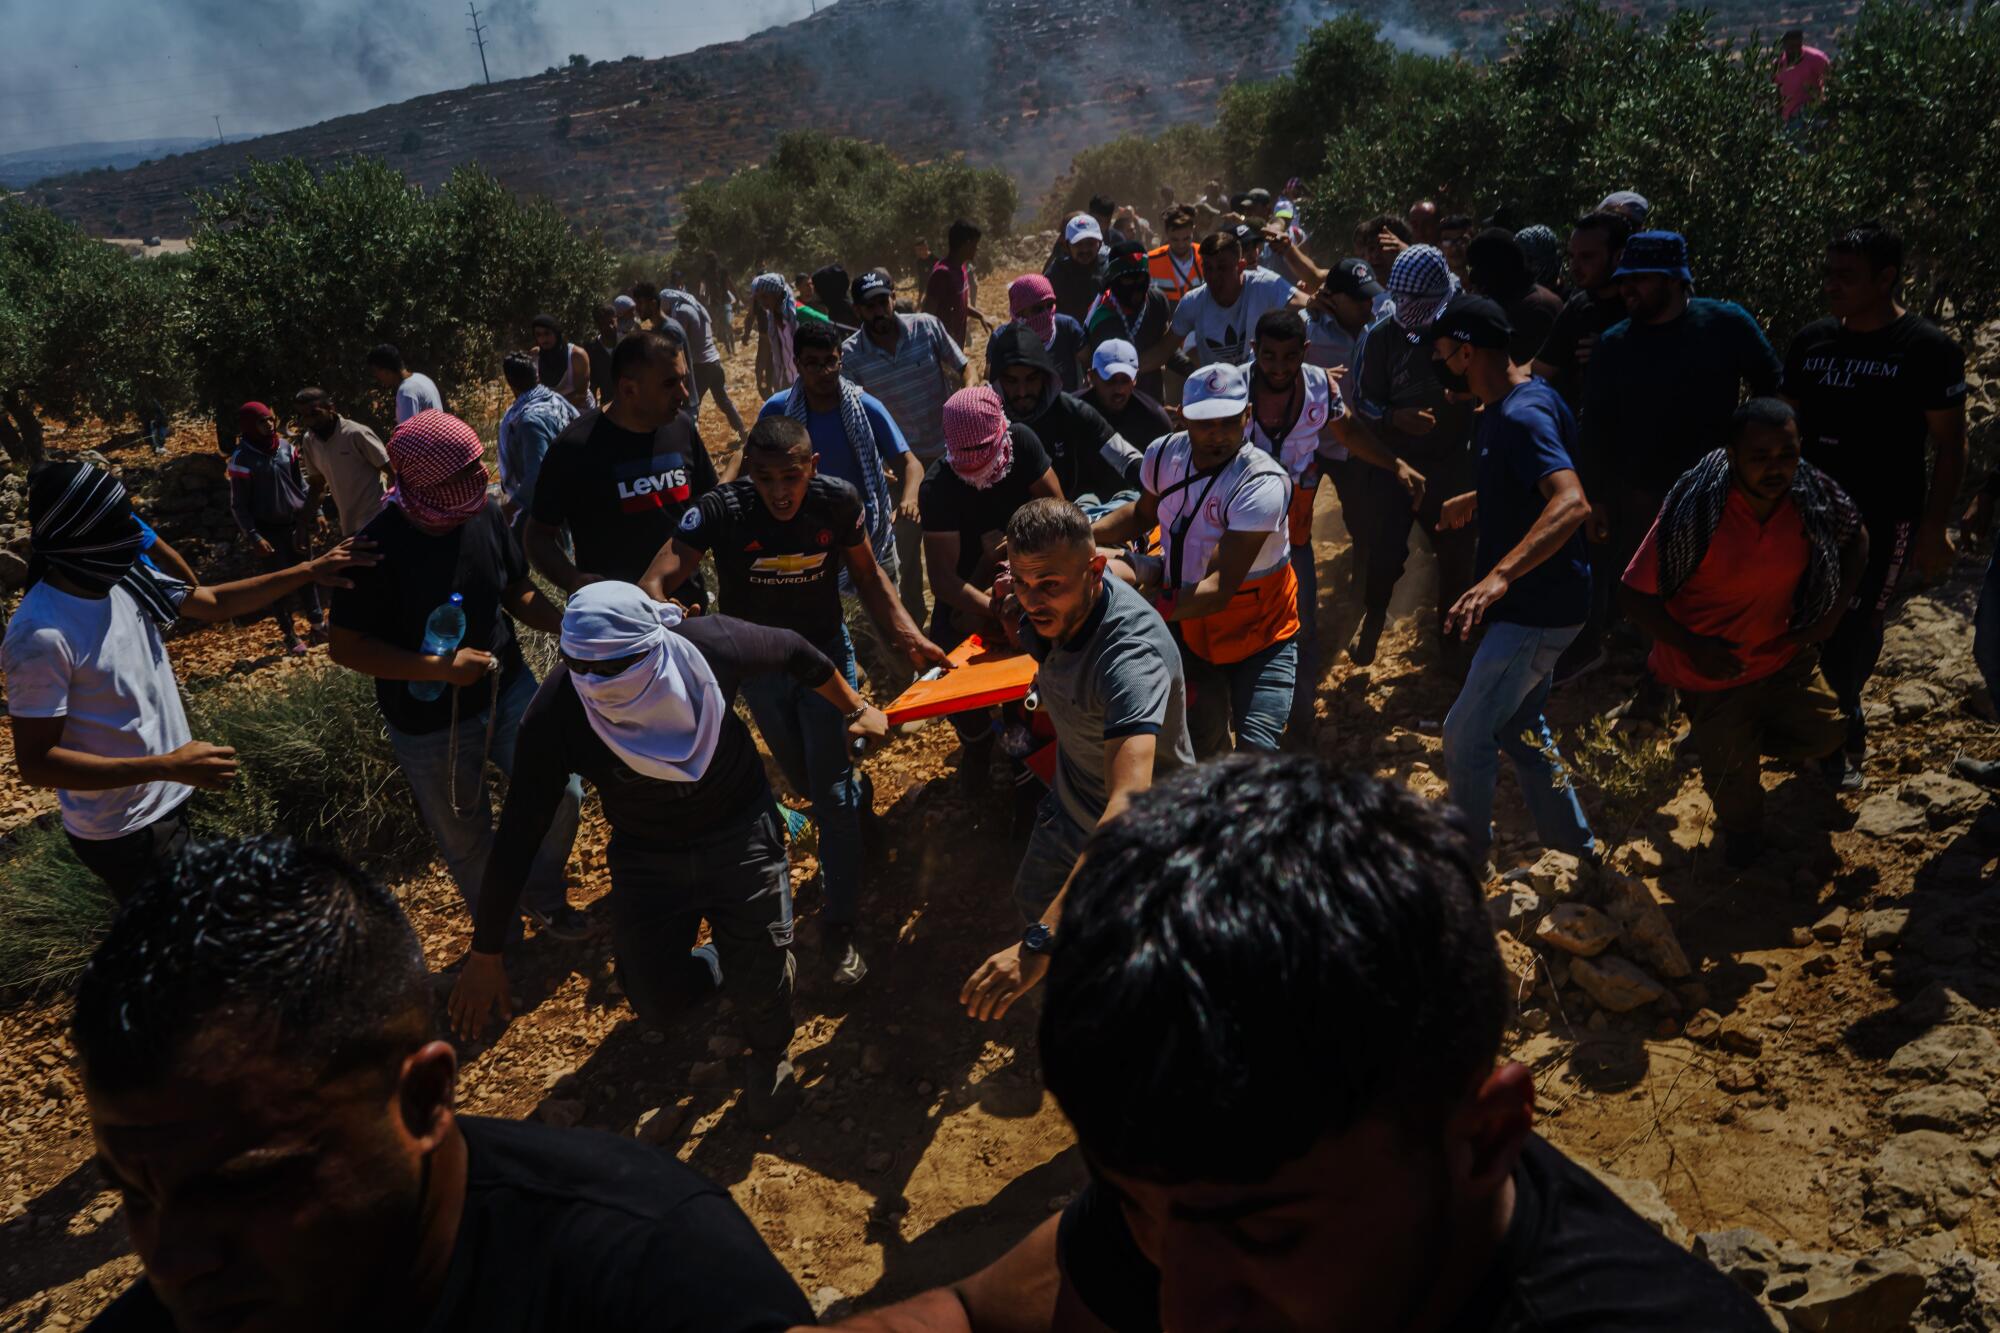 Protester shot by Israeli soldiers during a protest against a West Bank Jewish settlement is carried to safety